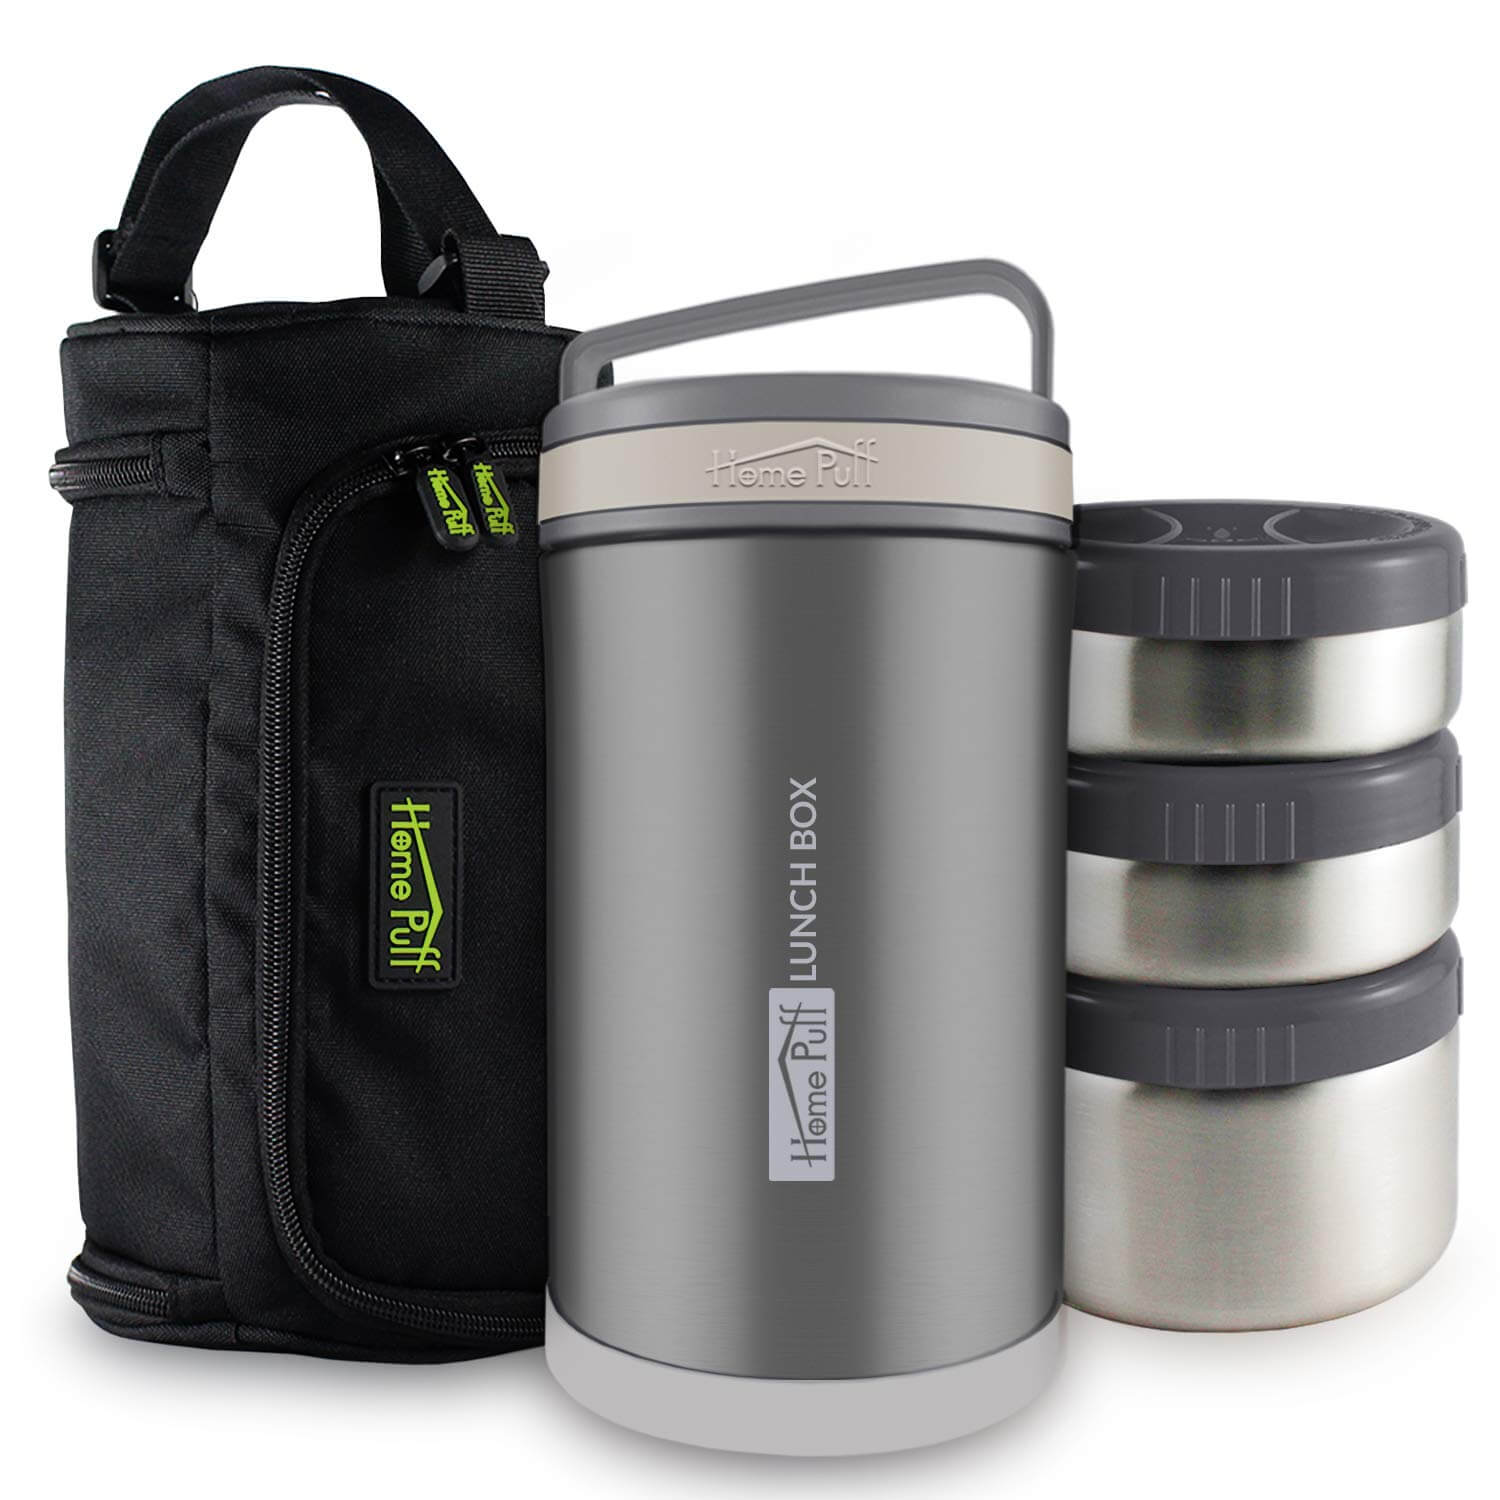 Home puff insulated lunch box with three containers and a bag